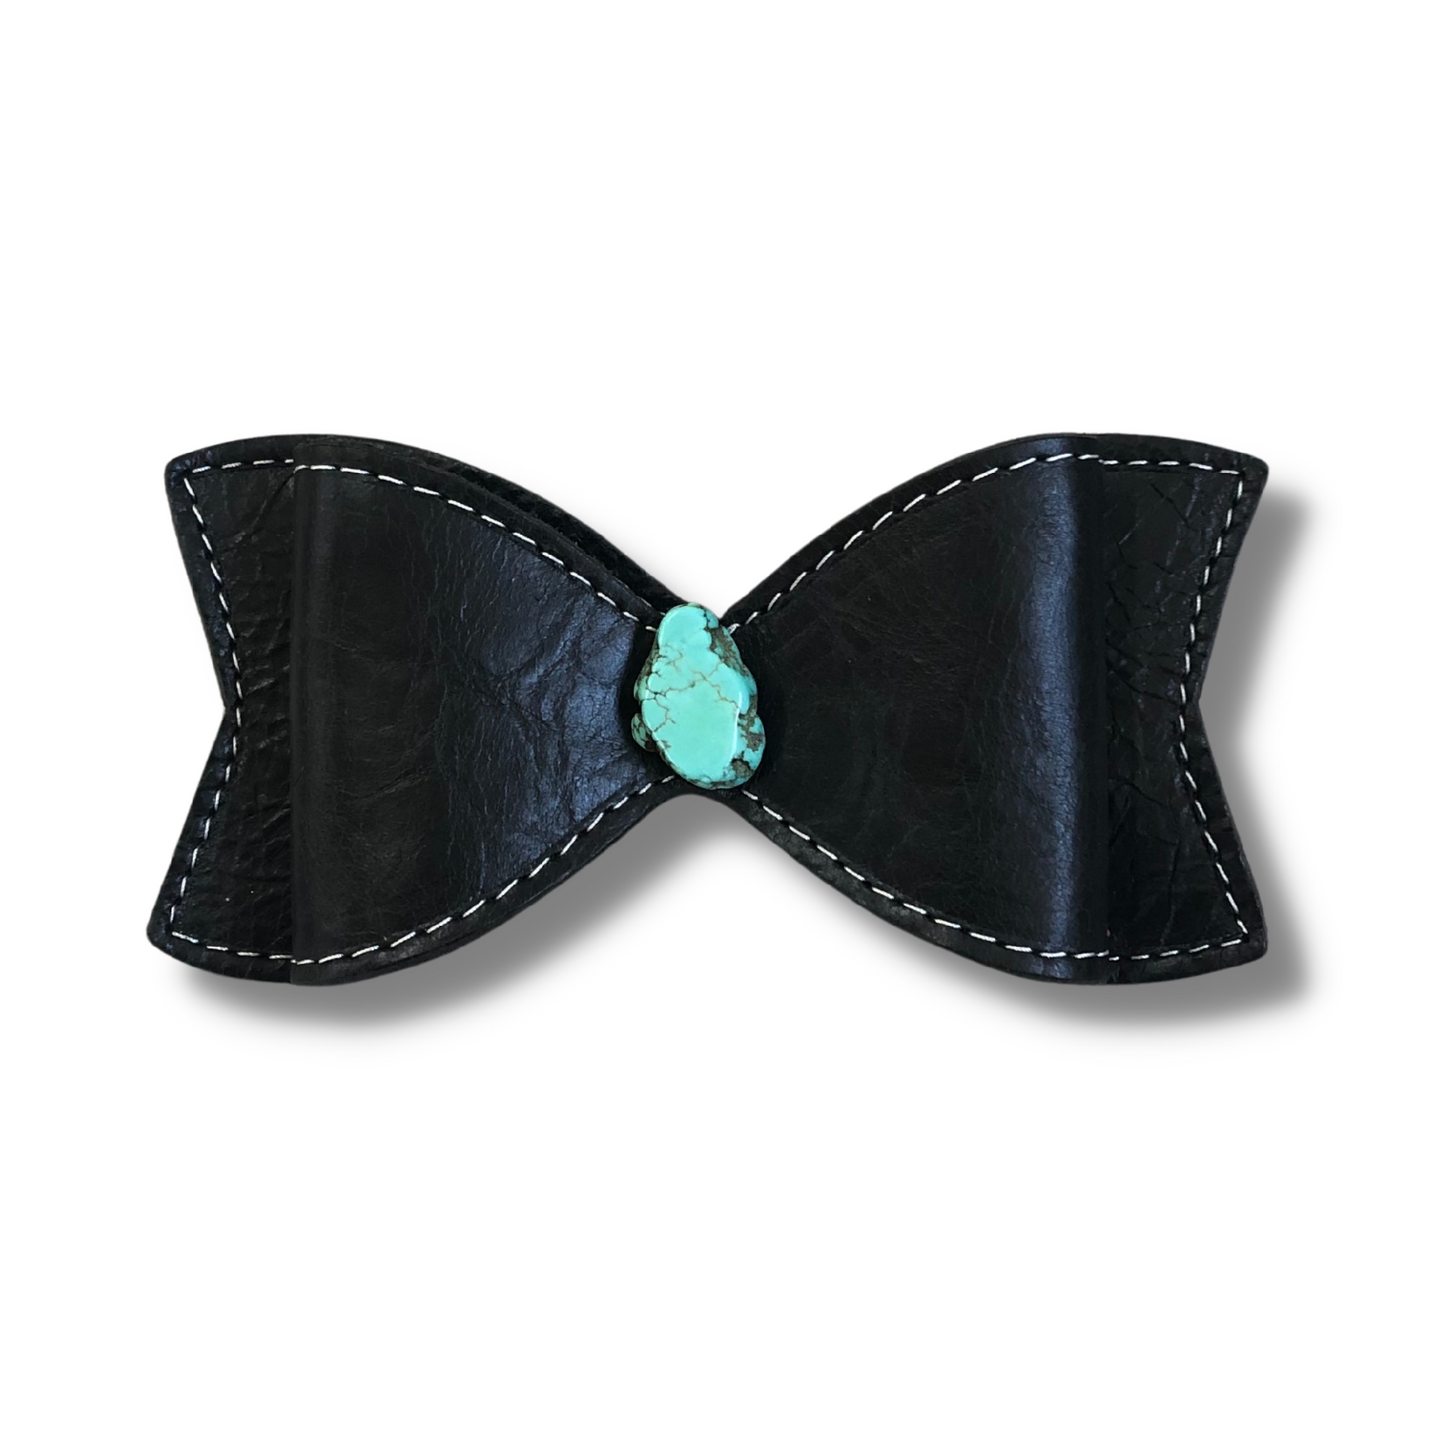 The Daring Bow Patch